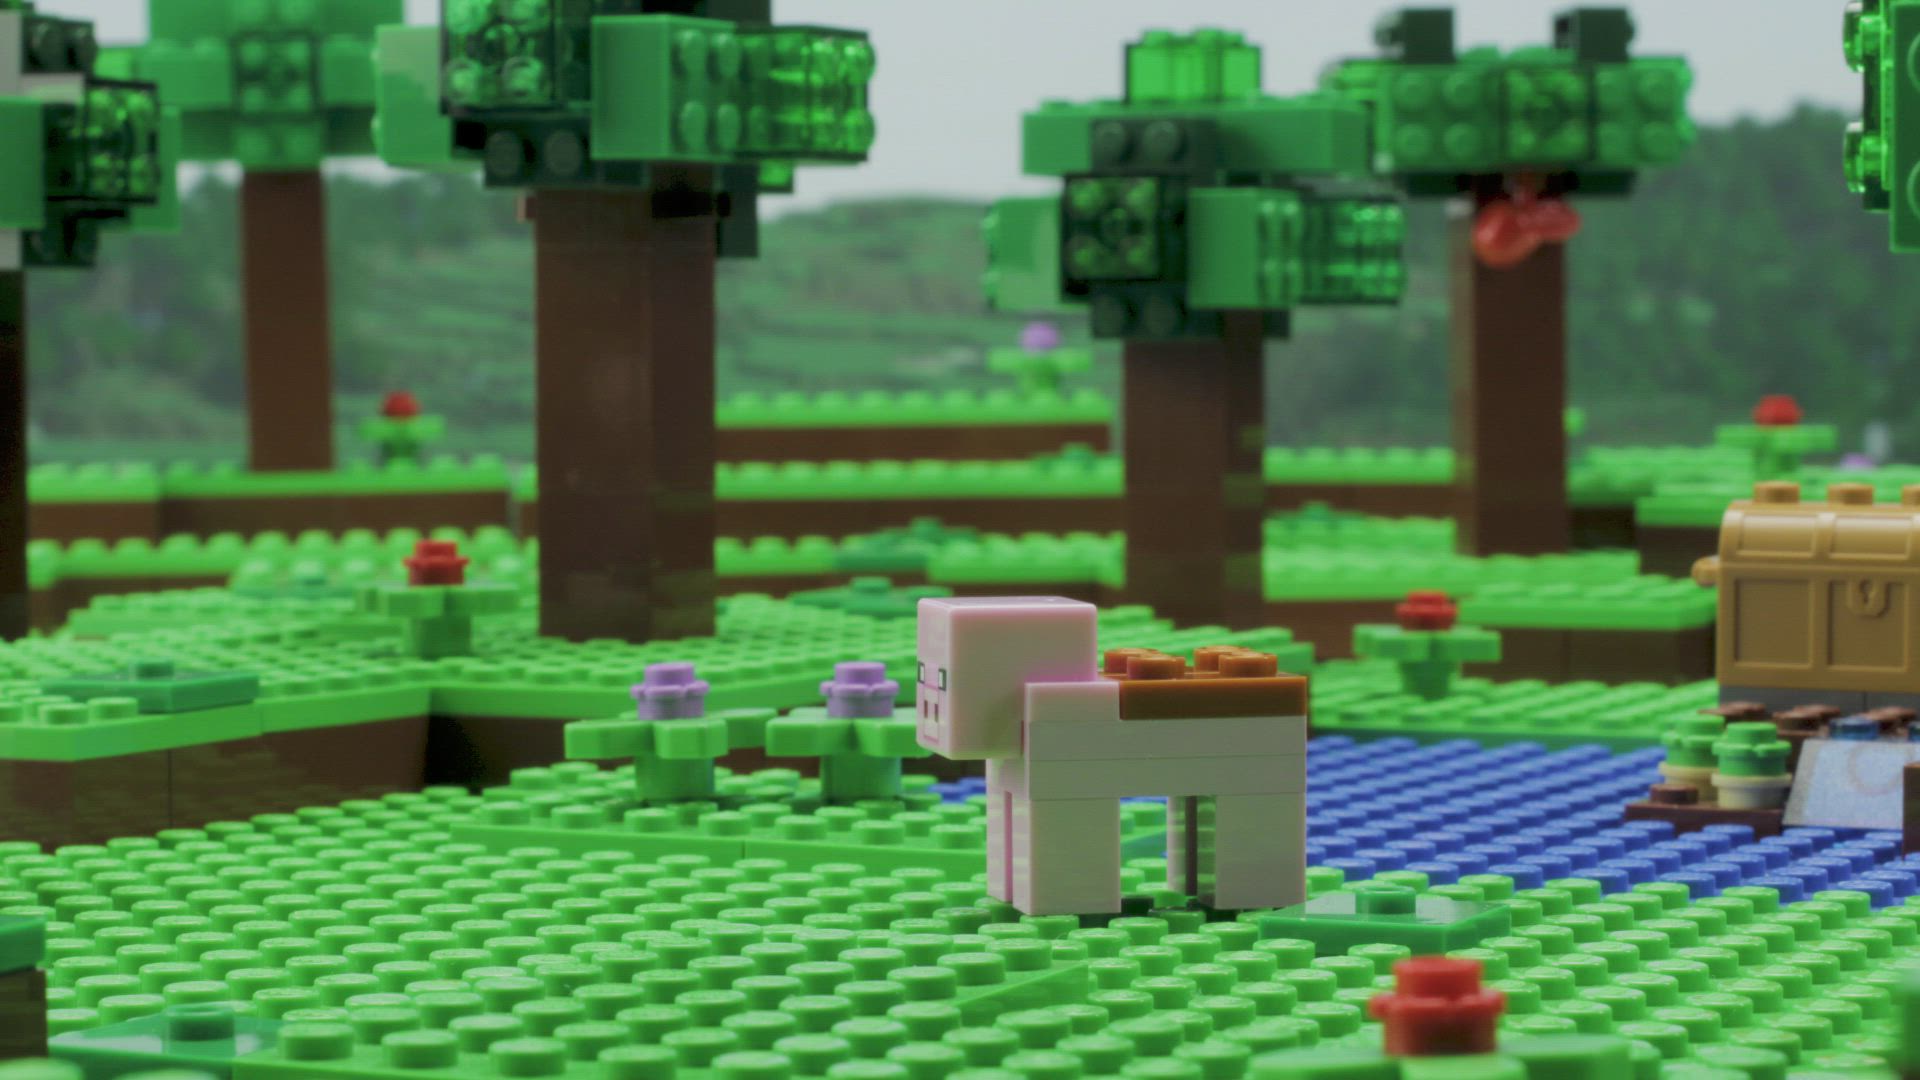 Lego Minecraft Wallpapers